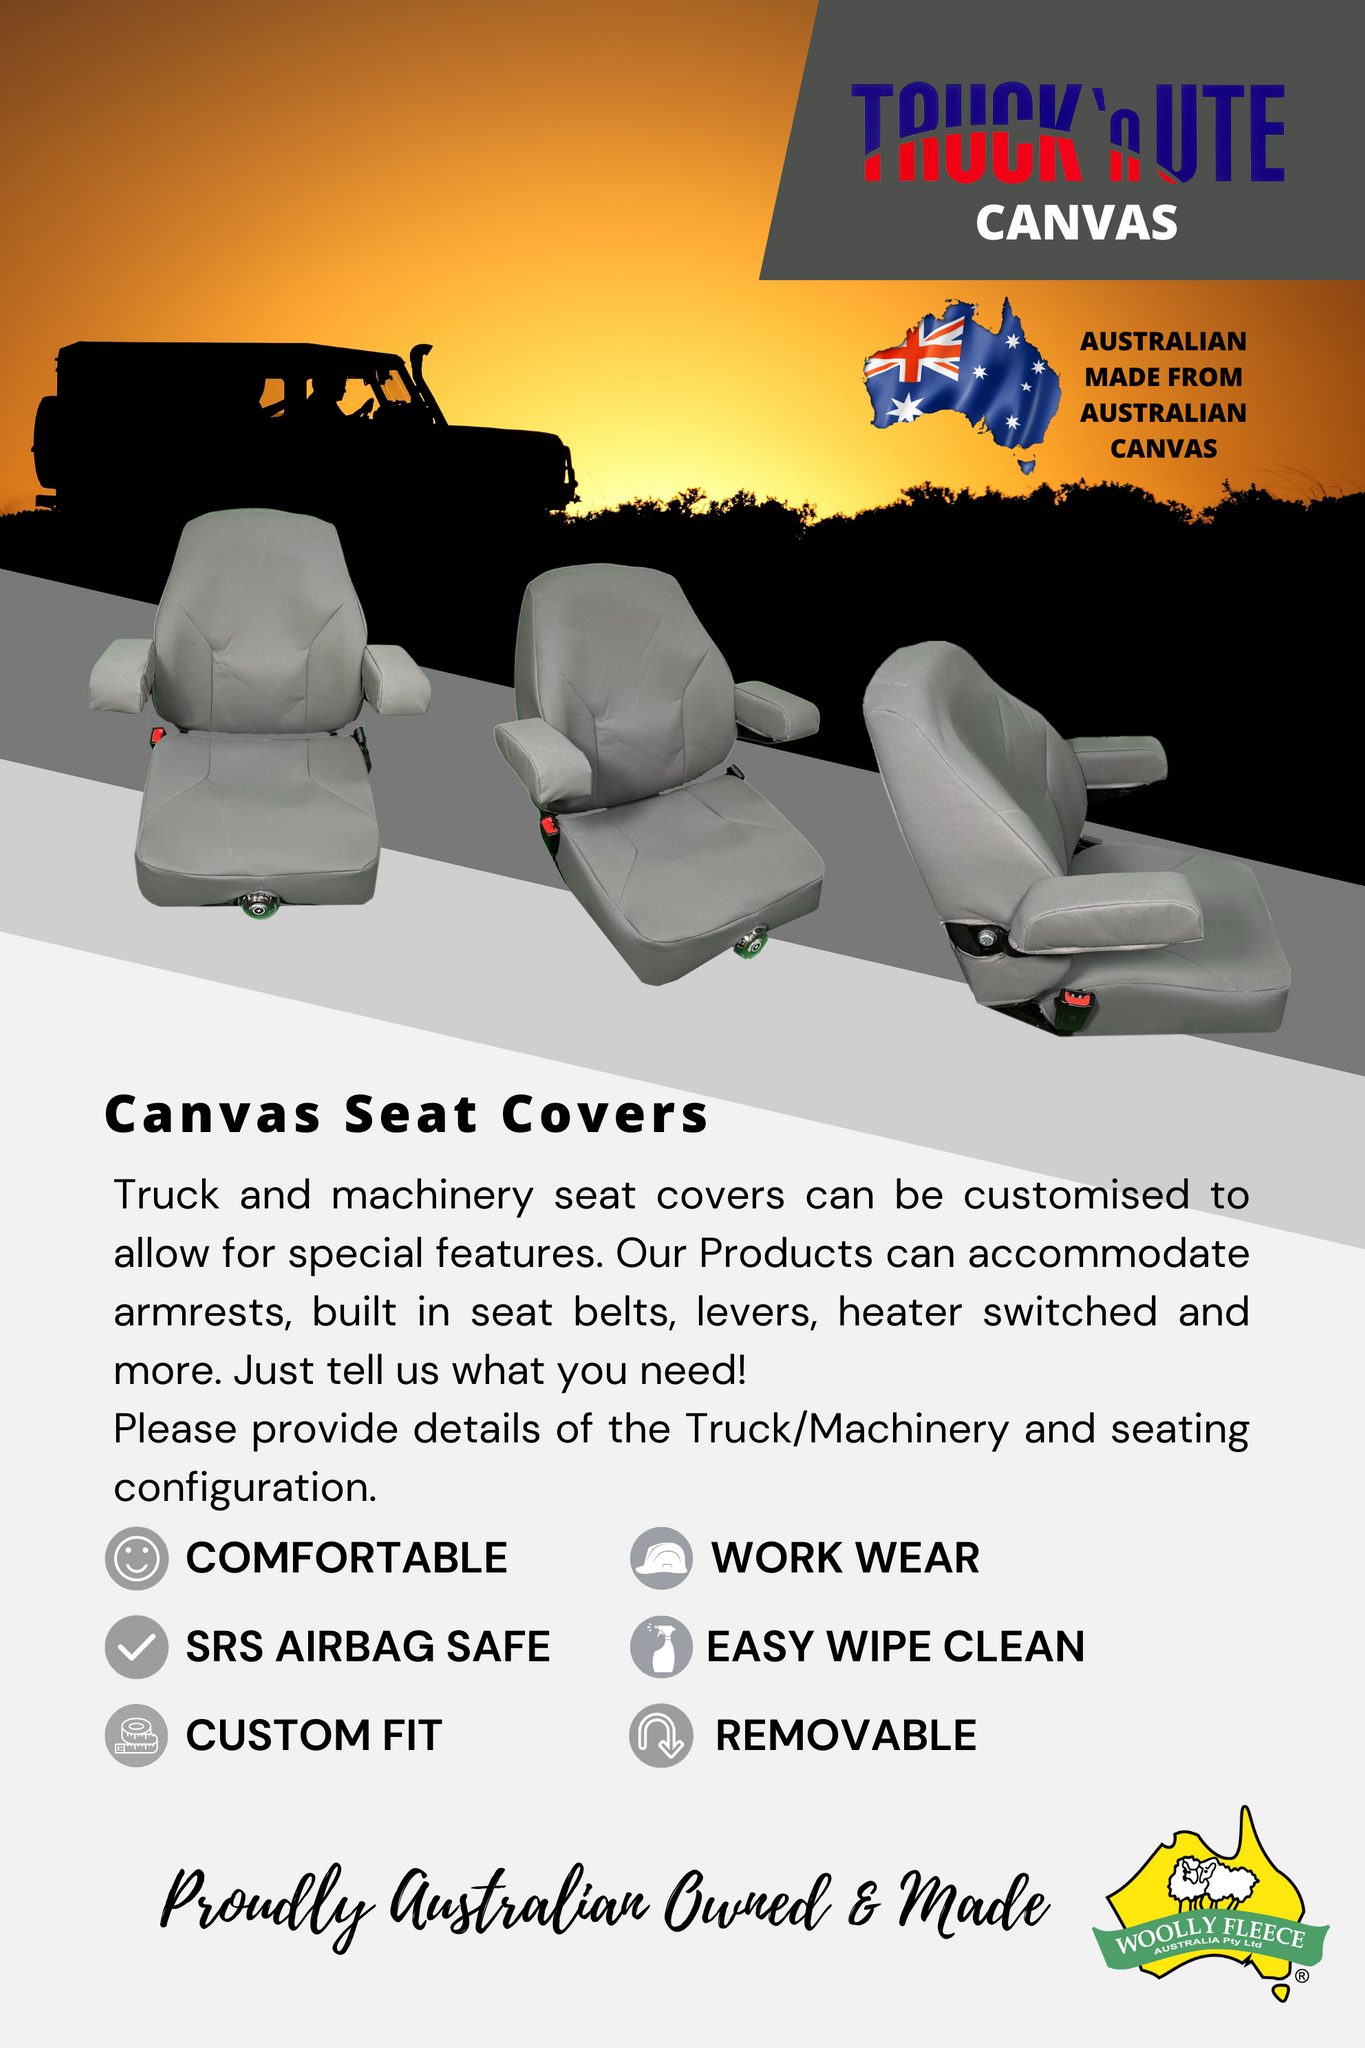 Truck'nUte Canvas seat covers for Machinery